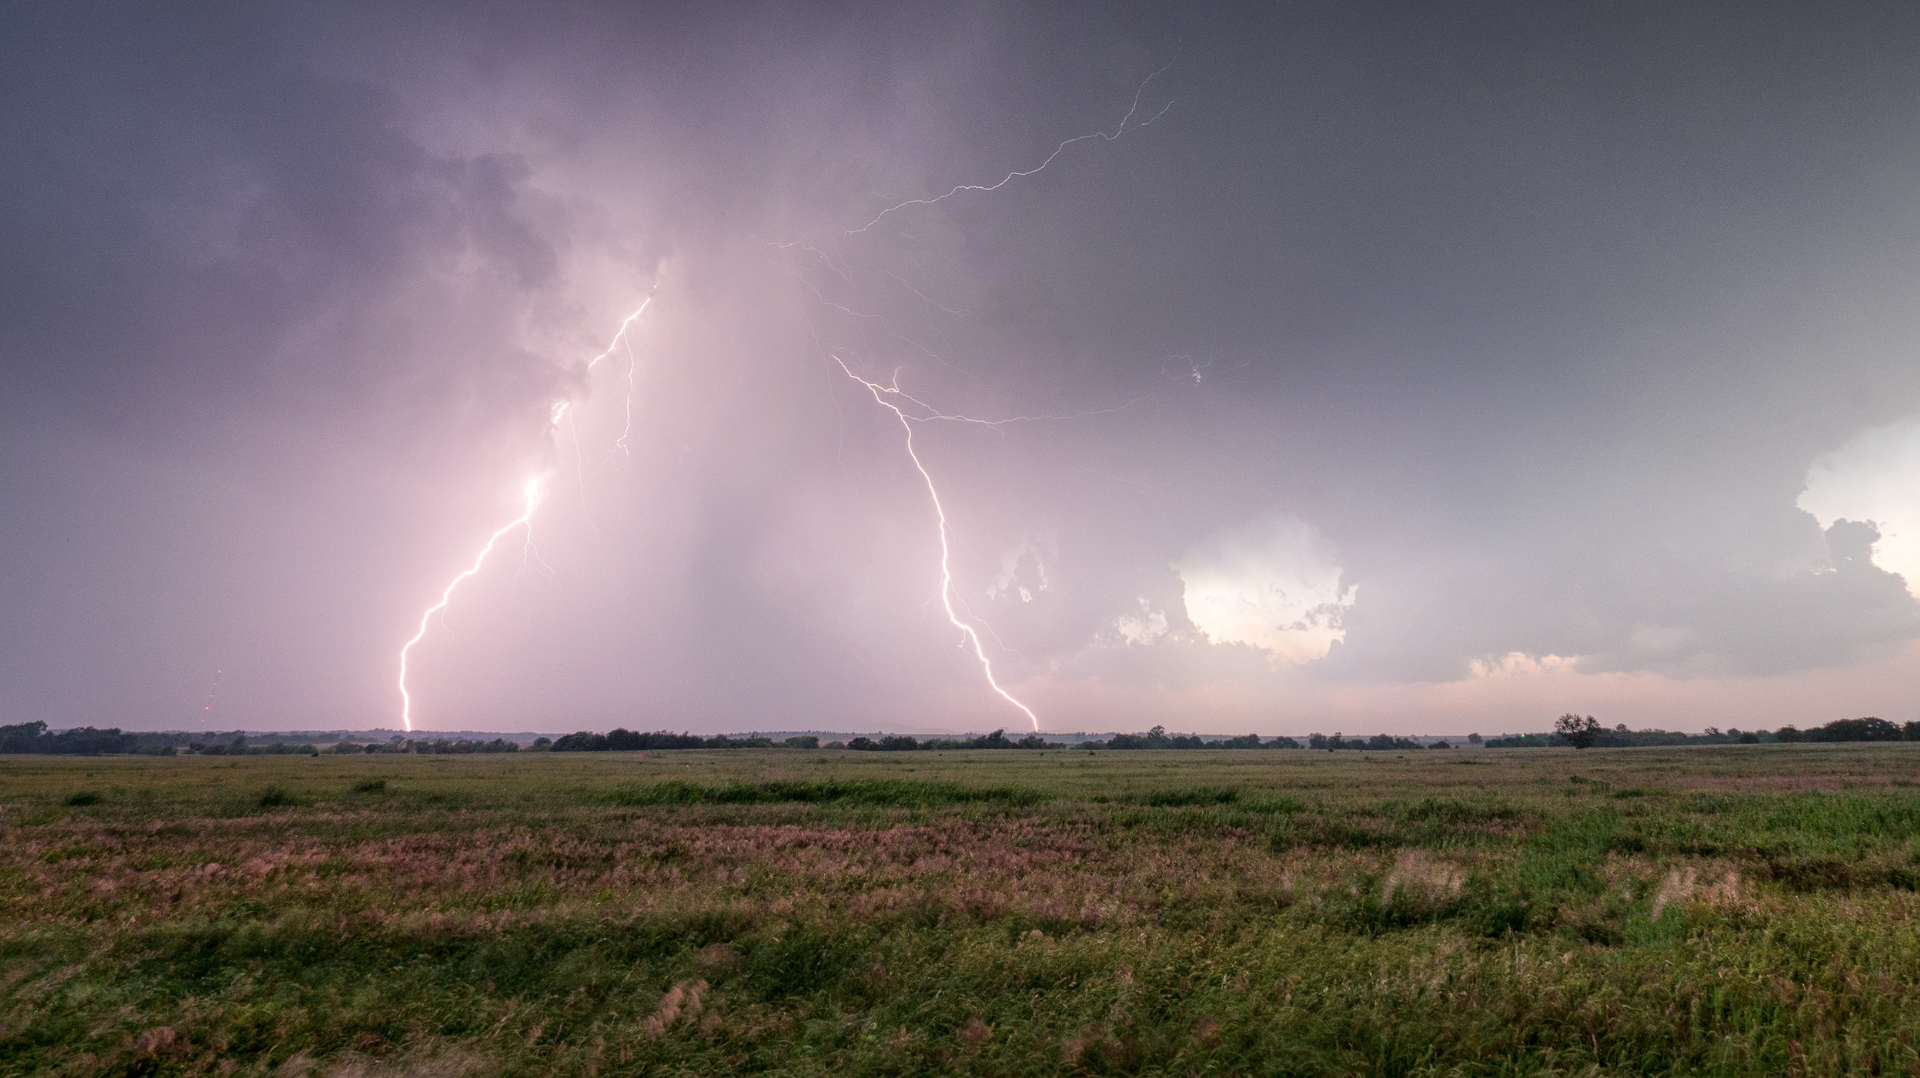 A Thunderstorm Passes over an Open Field in Oklahoma